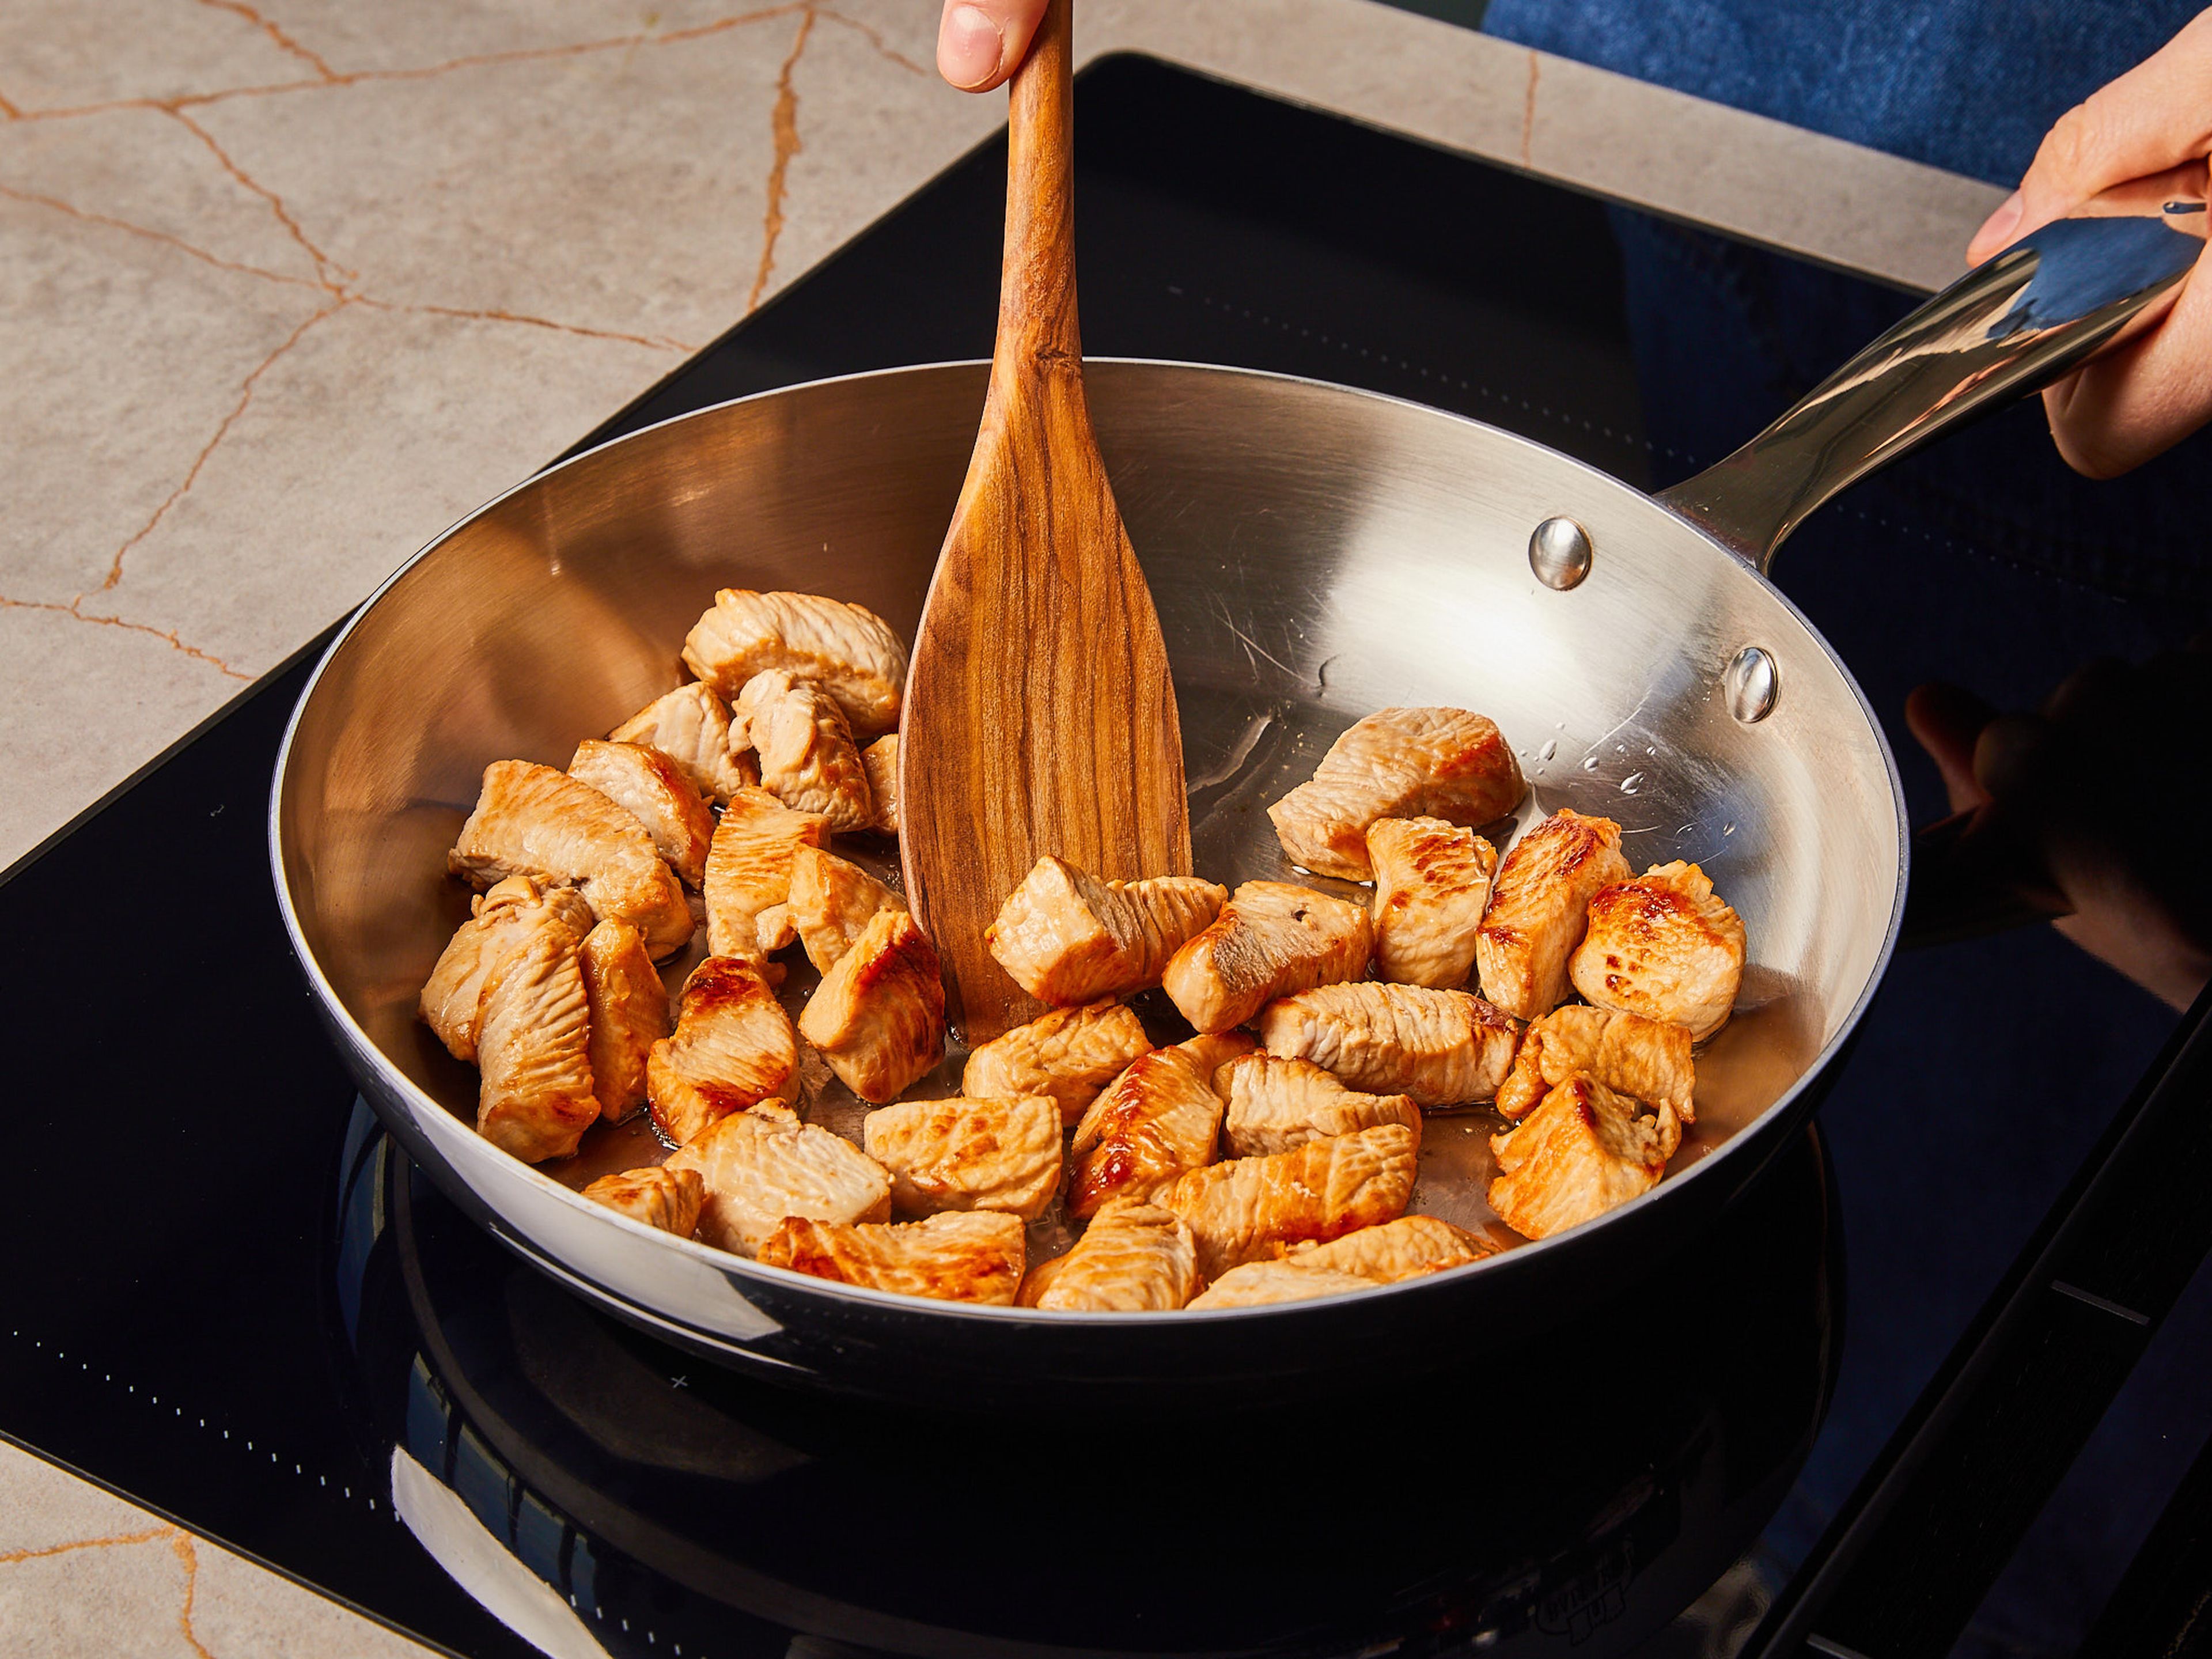 Heat vegetable oil in a large pan and add turkey. Let cook until golden brown, approx. 2 - 3 min. Remove turkey from pan, season with salt and pepper, and set aside.